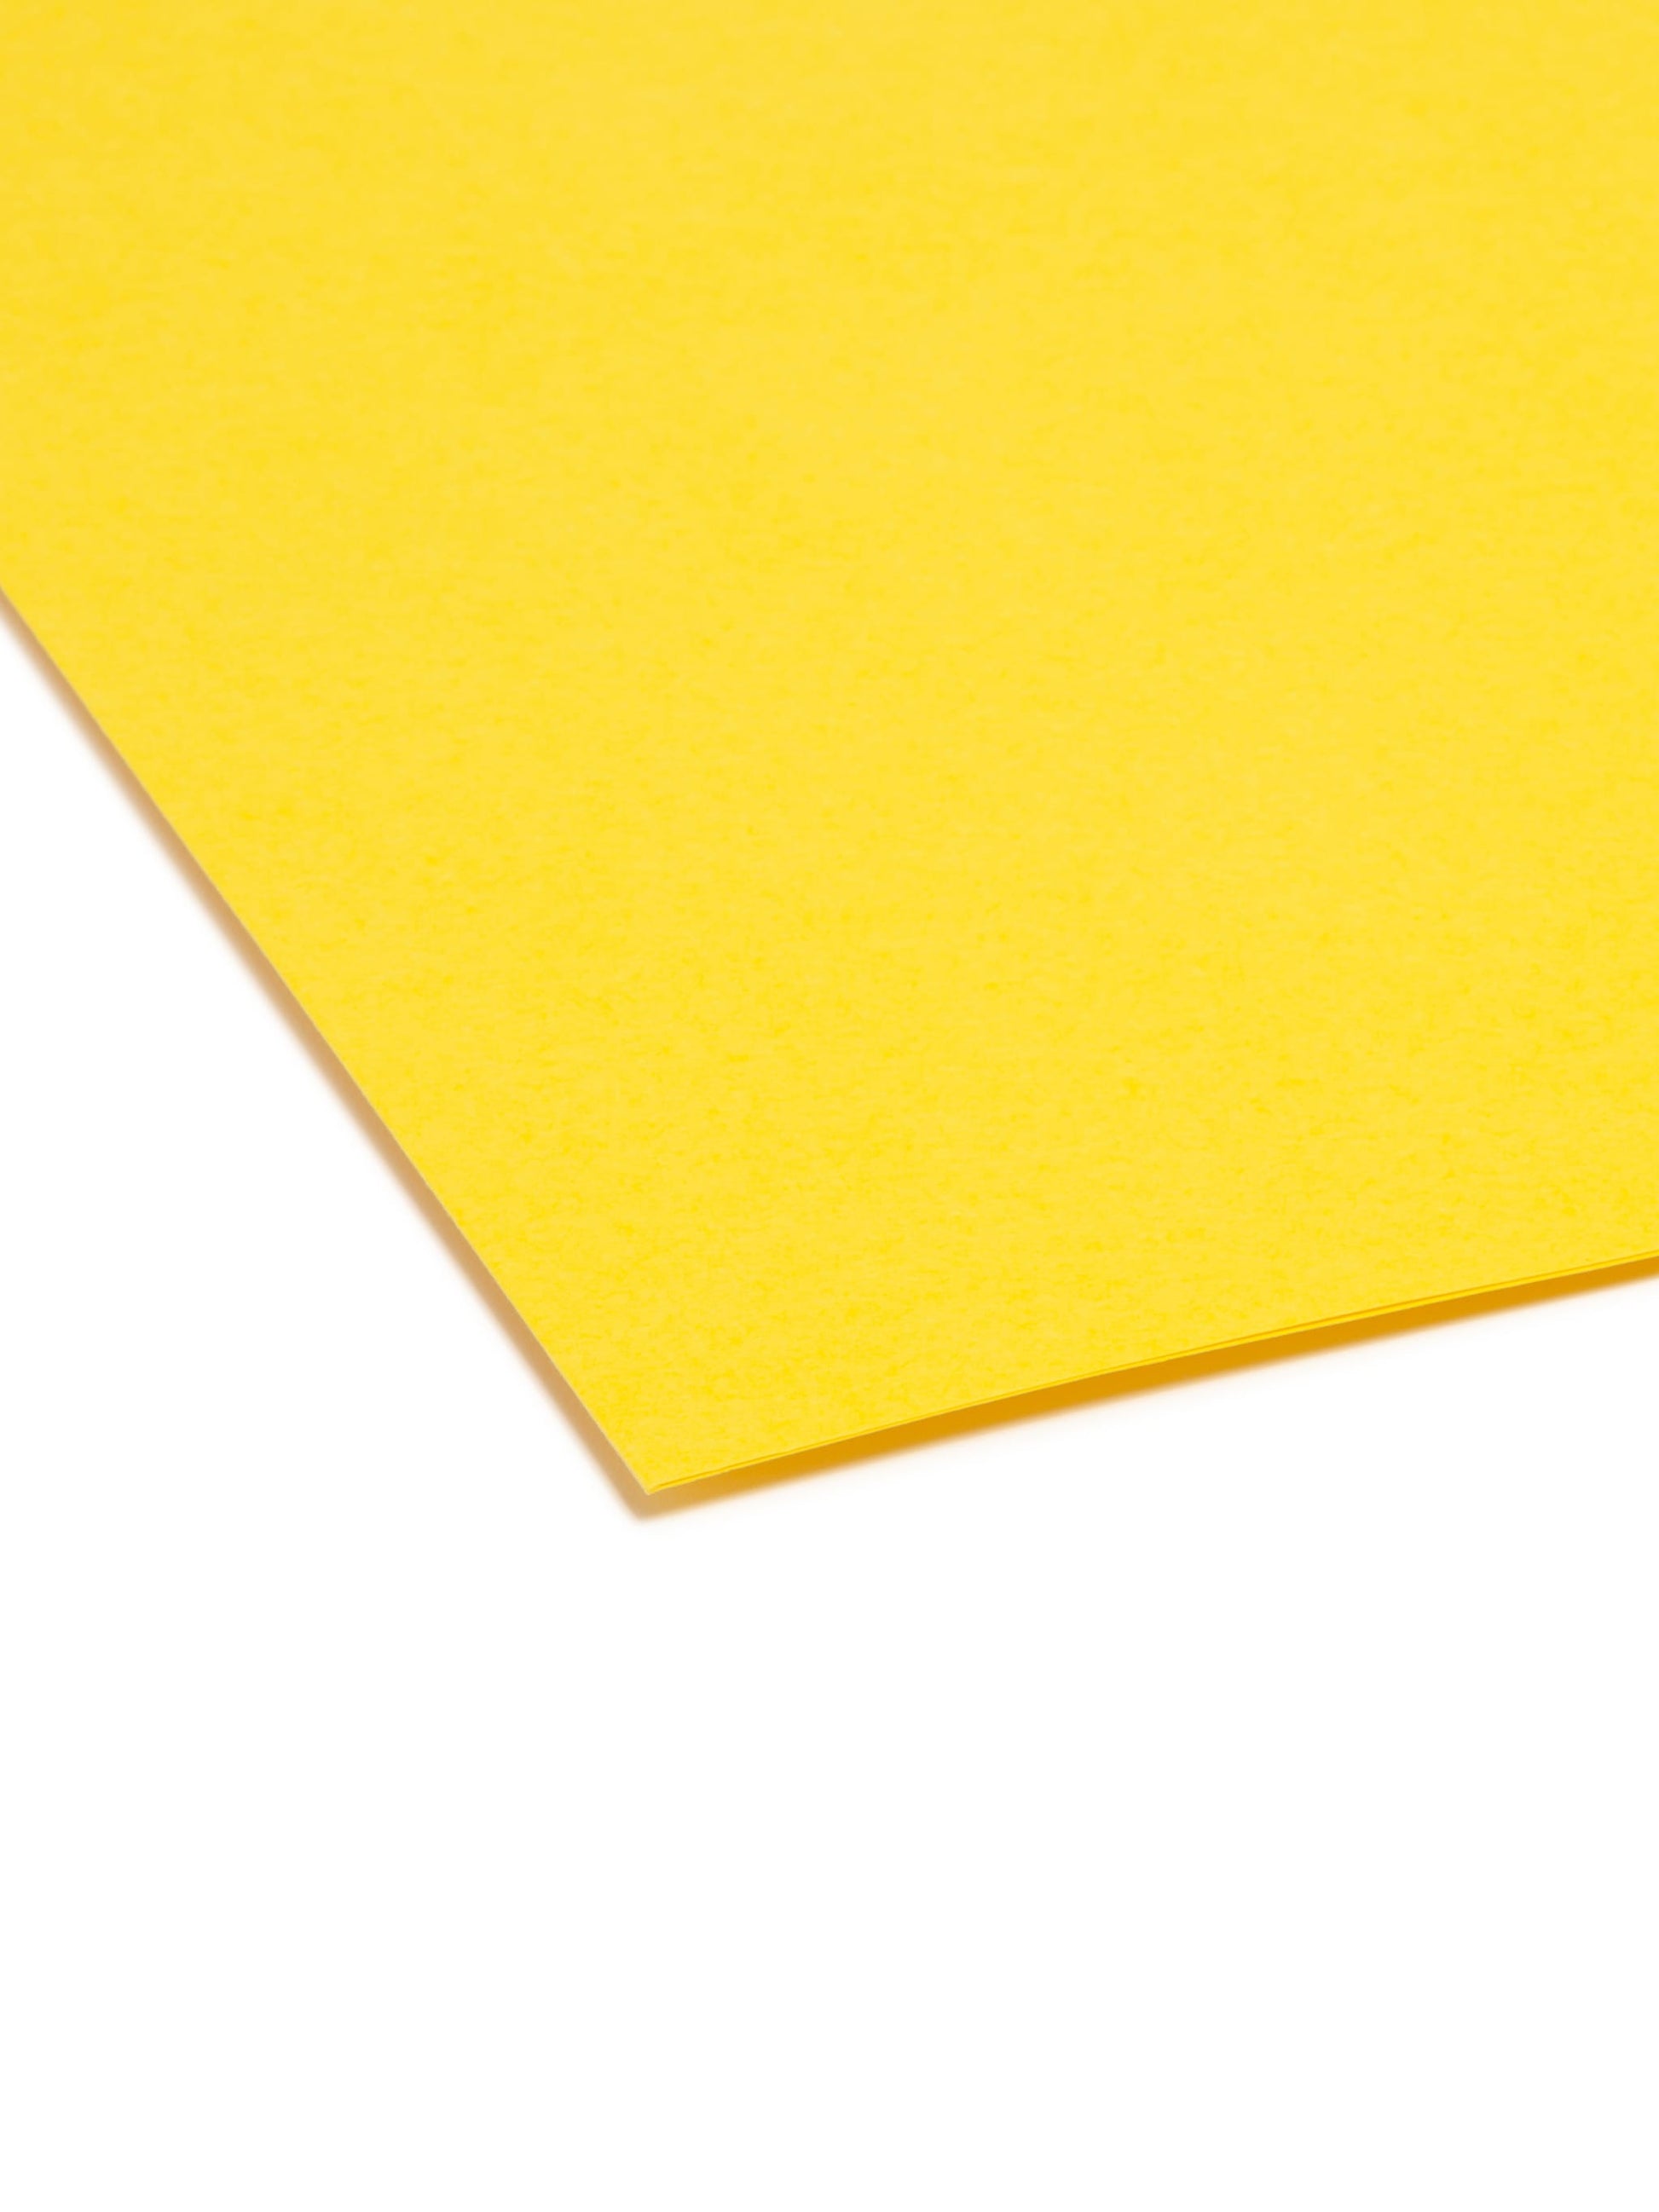 Reinforced Tab File Folders, Straight-Cut Tab, Yellow Color, Letter Size, Set of 100, 086486129107